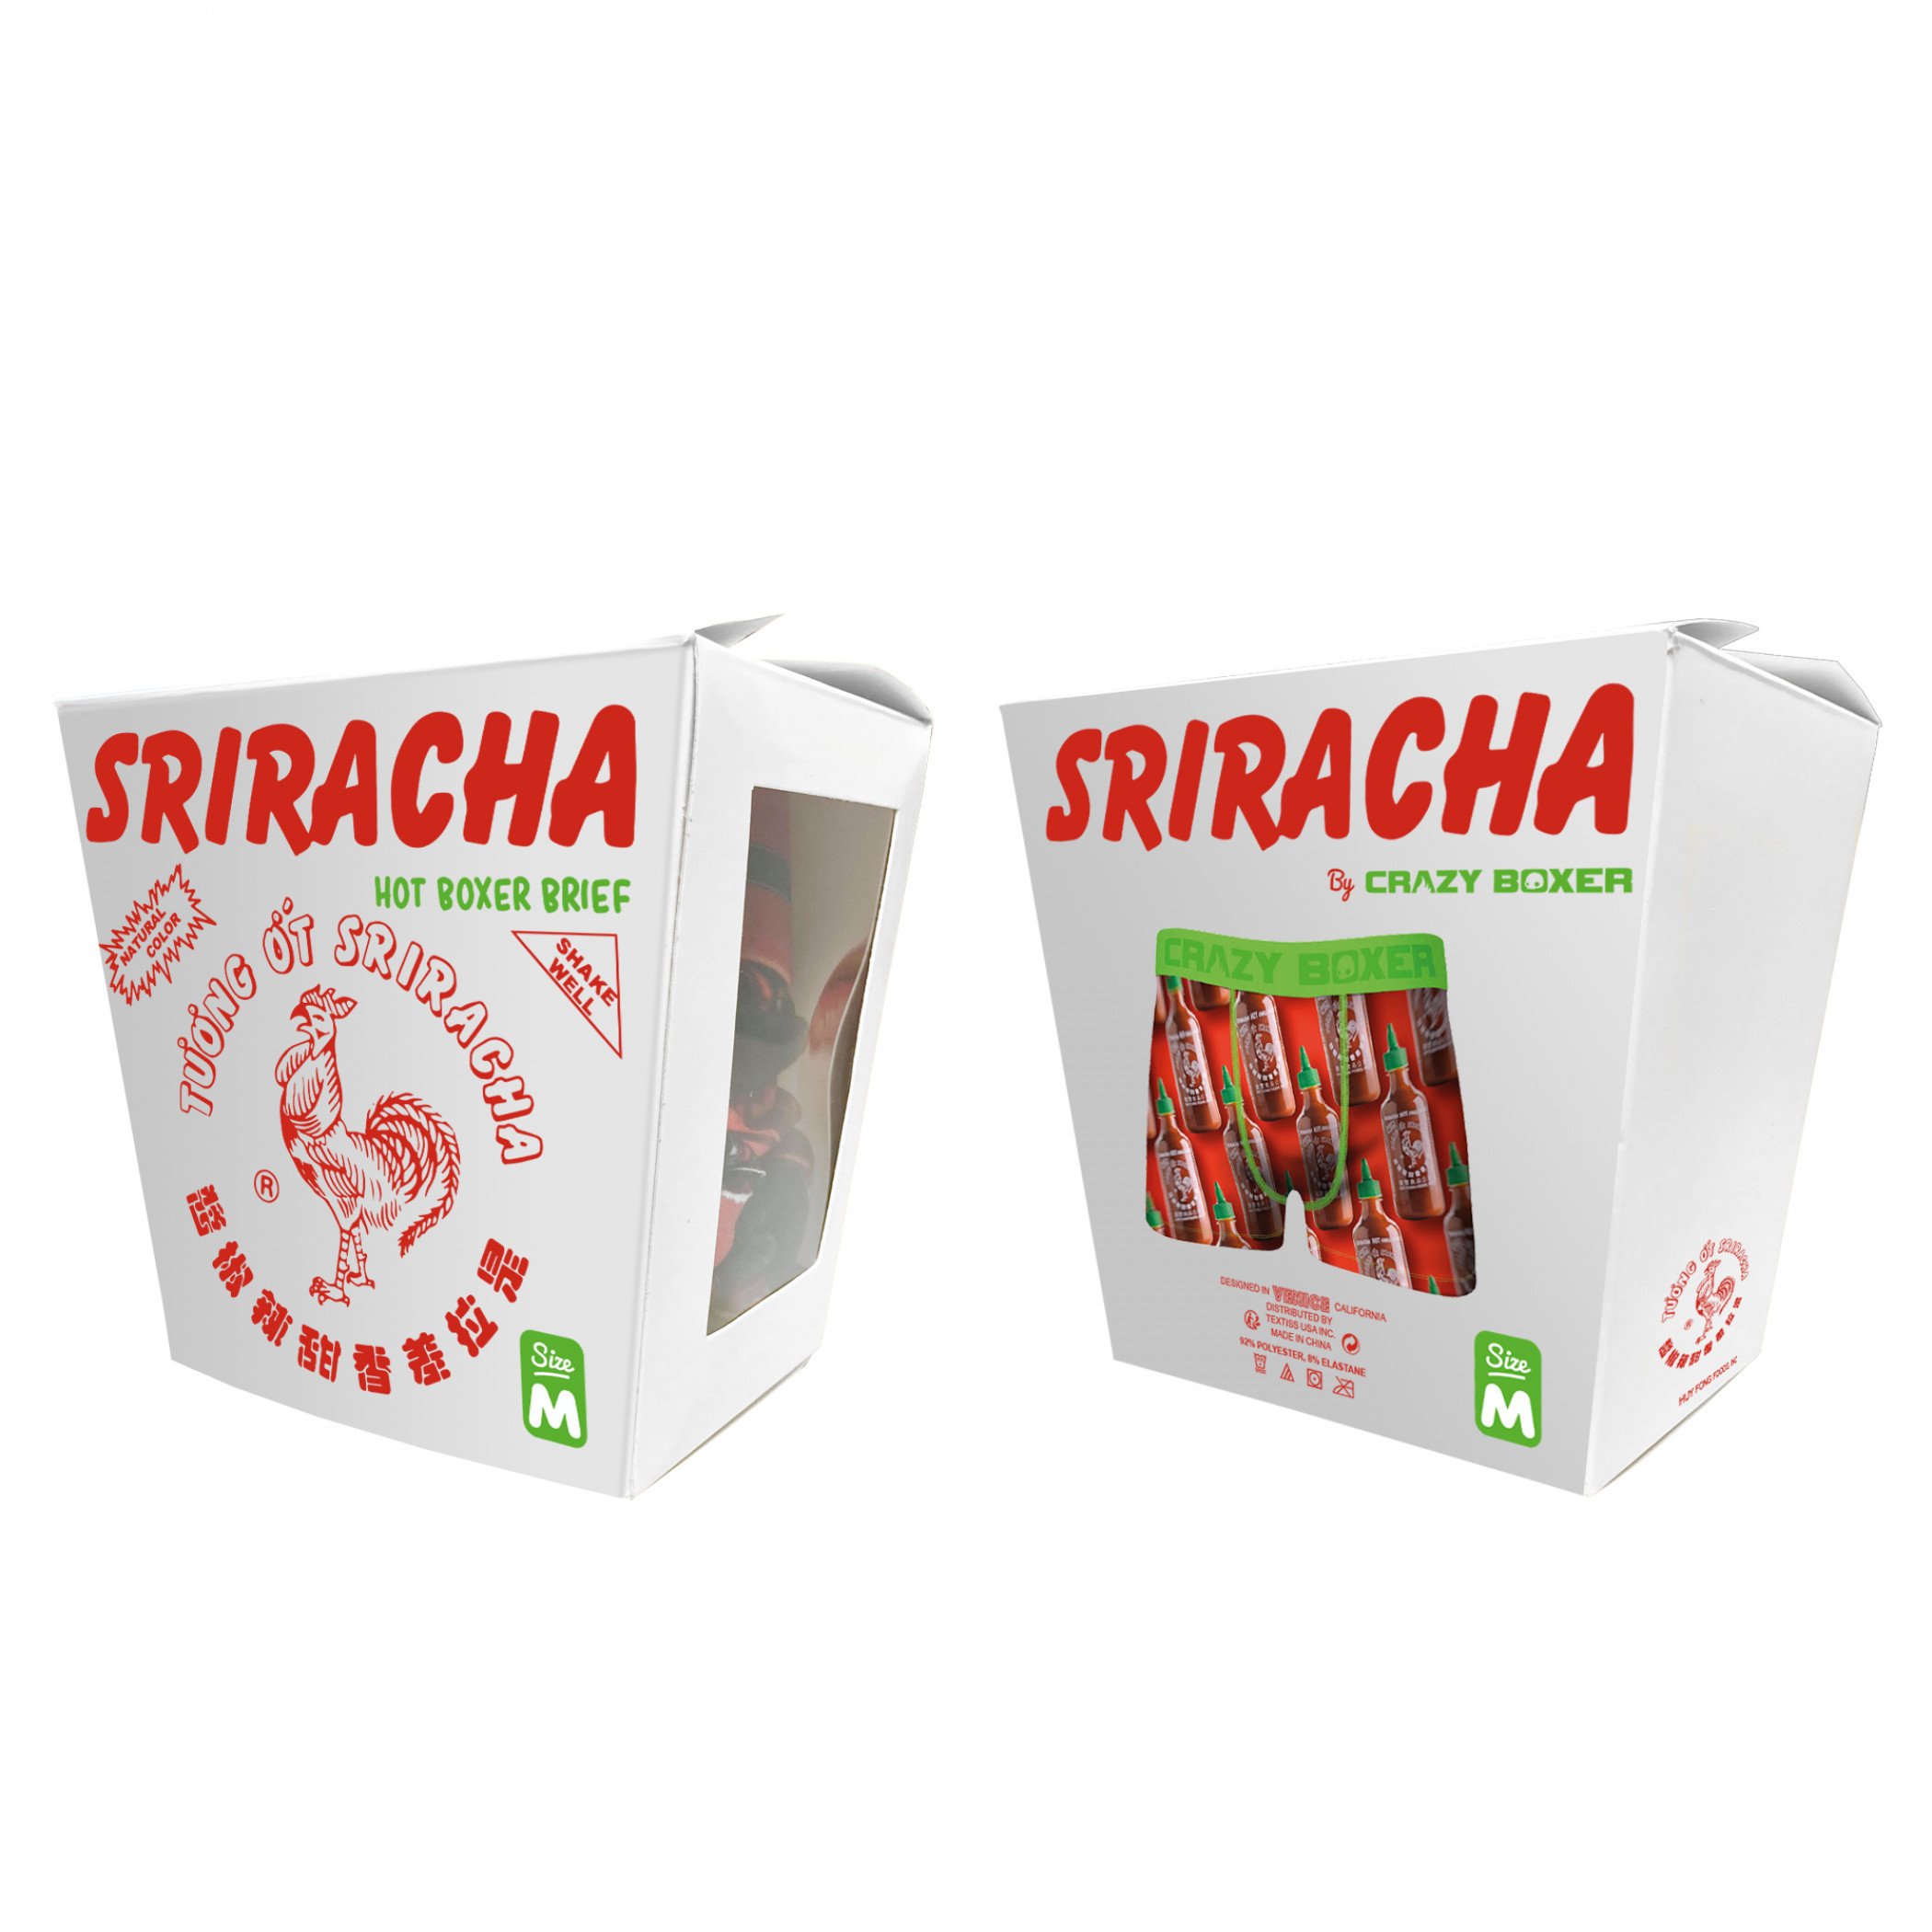 Sriracha Hot Chili Sauce Boxer Briefs in Chinese Take Out Container-XLarge - image 3 of 6